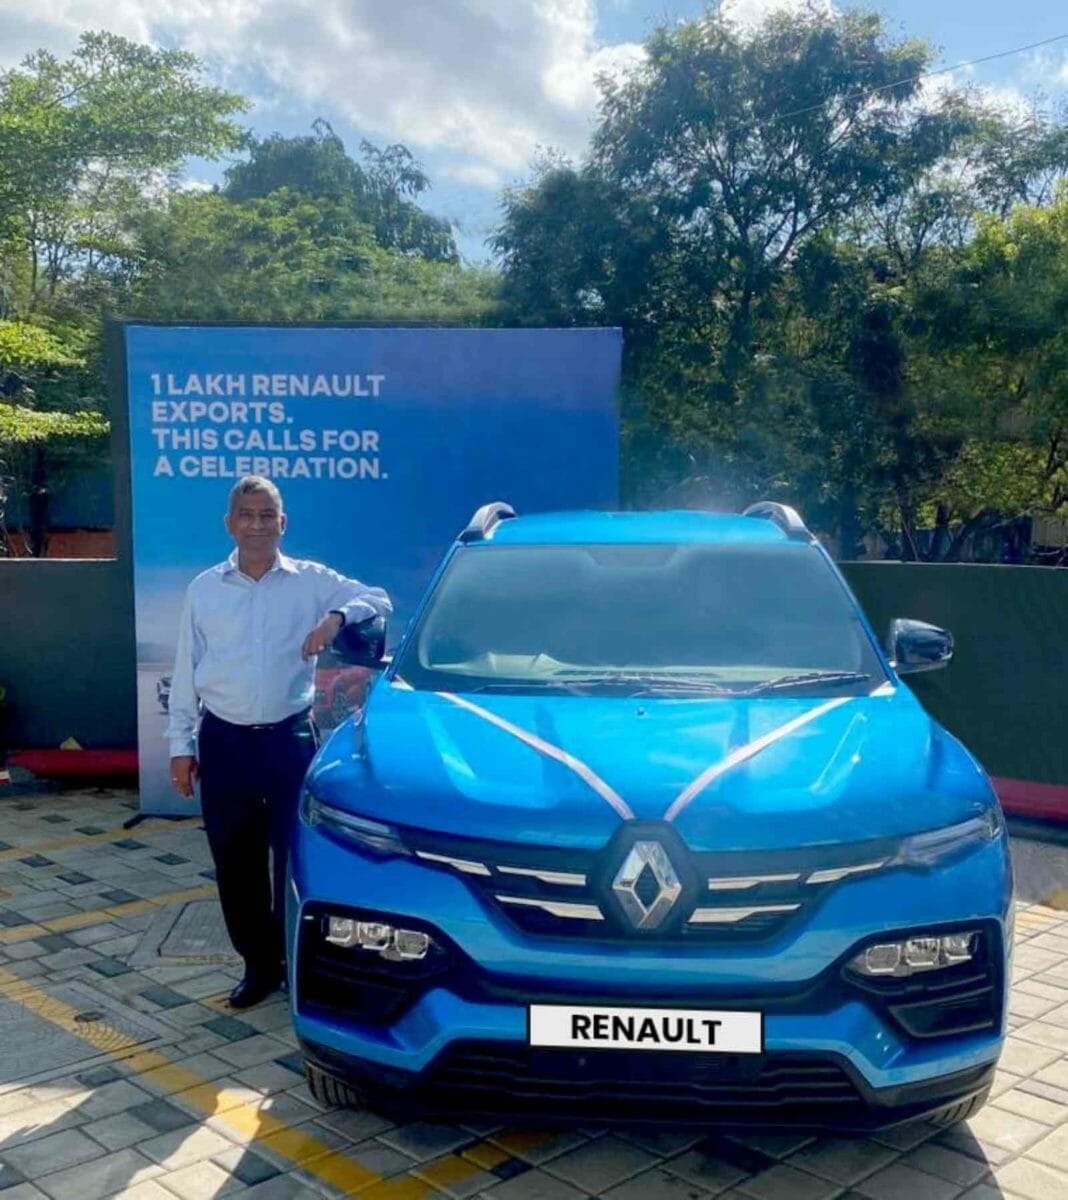 Renault 1 Lakh Exports